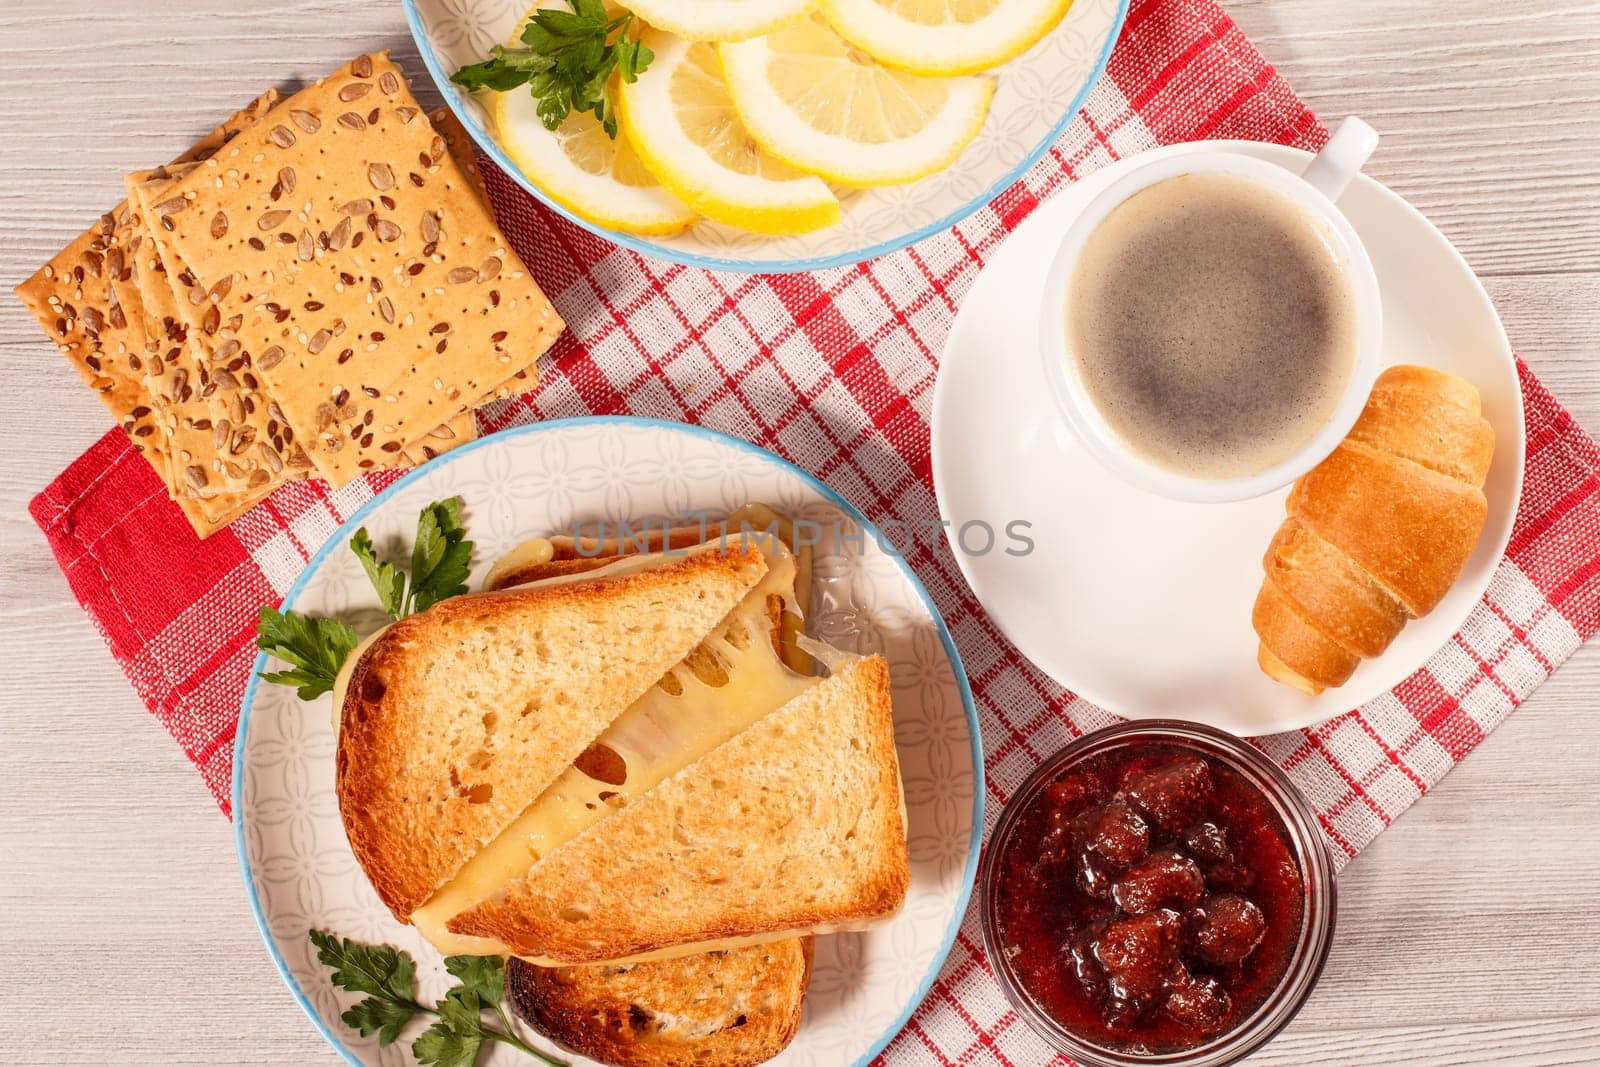 Cup of coffee, toasted slices of bread with cheese and green parsley on white plate, glass bowl with strawberry jam and lemon with red kitchen napkin. Top view. Good food for breakfast.